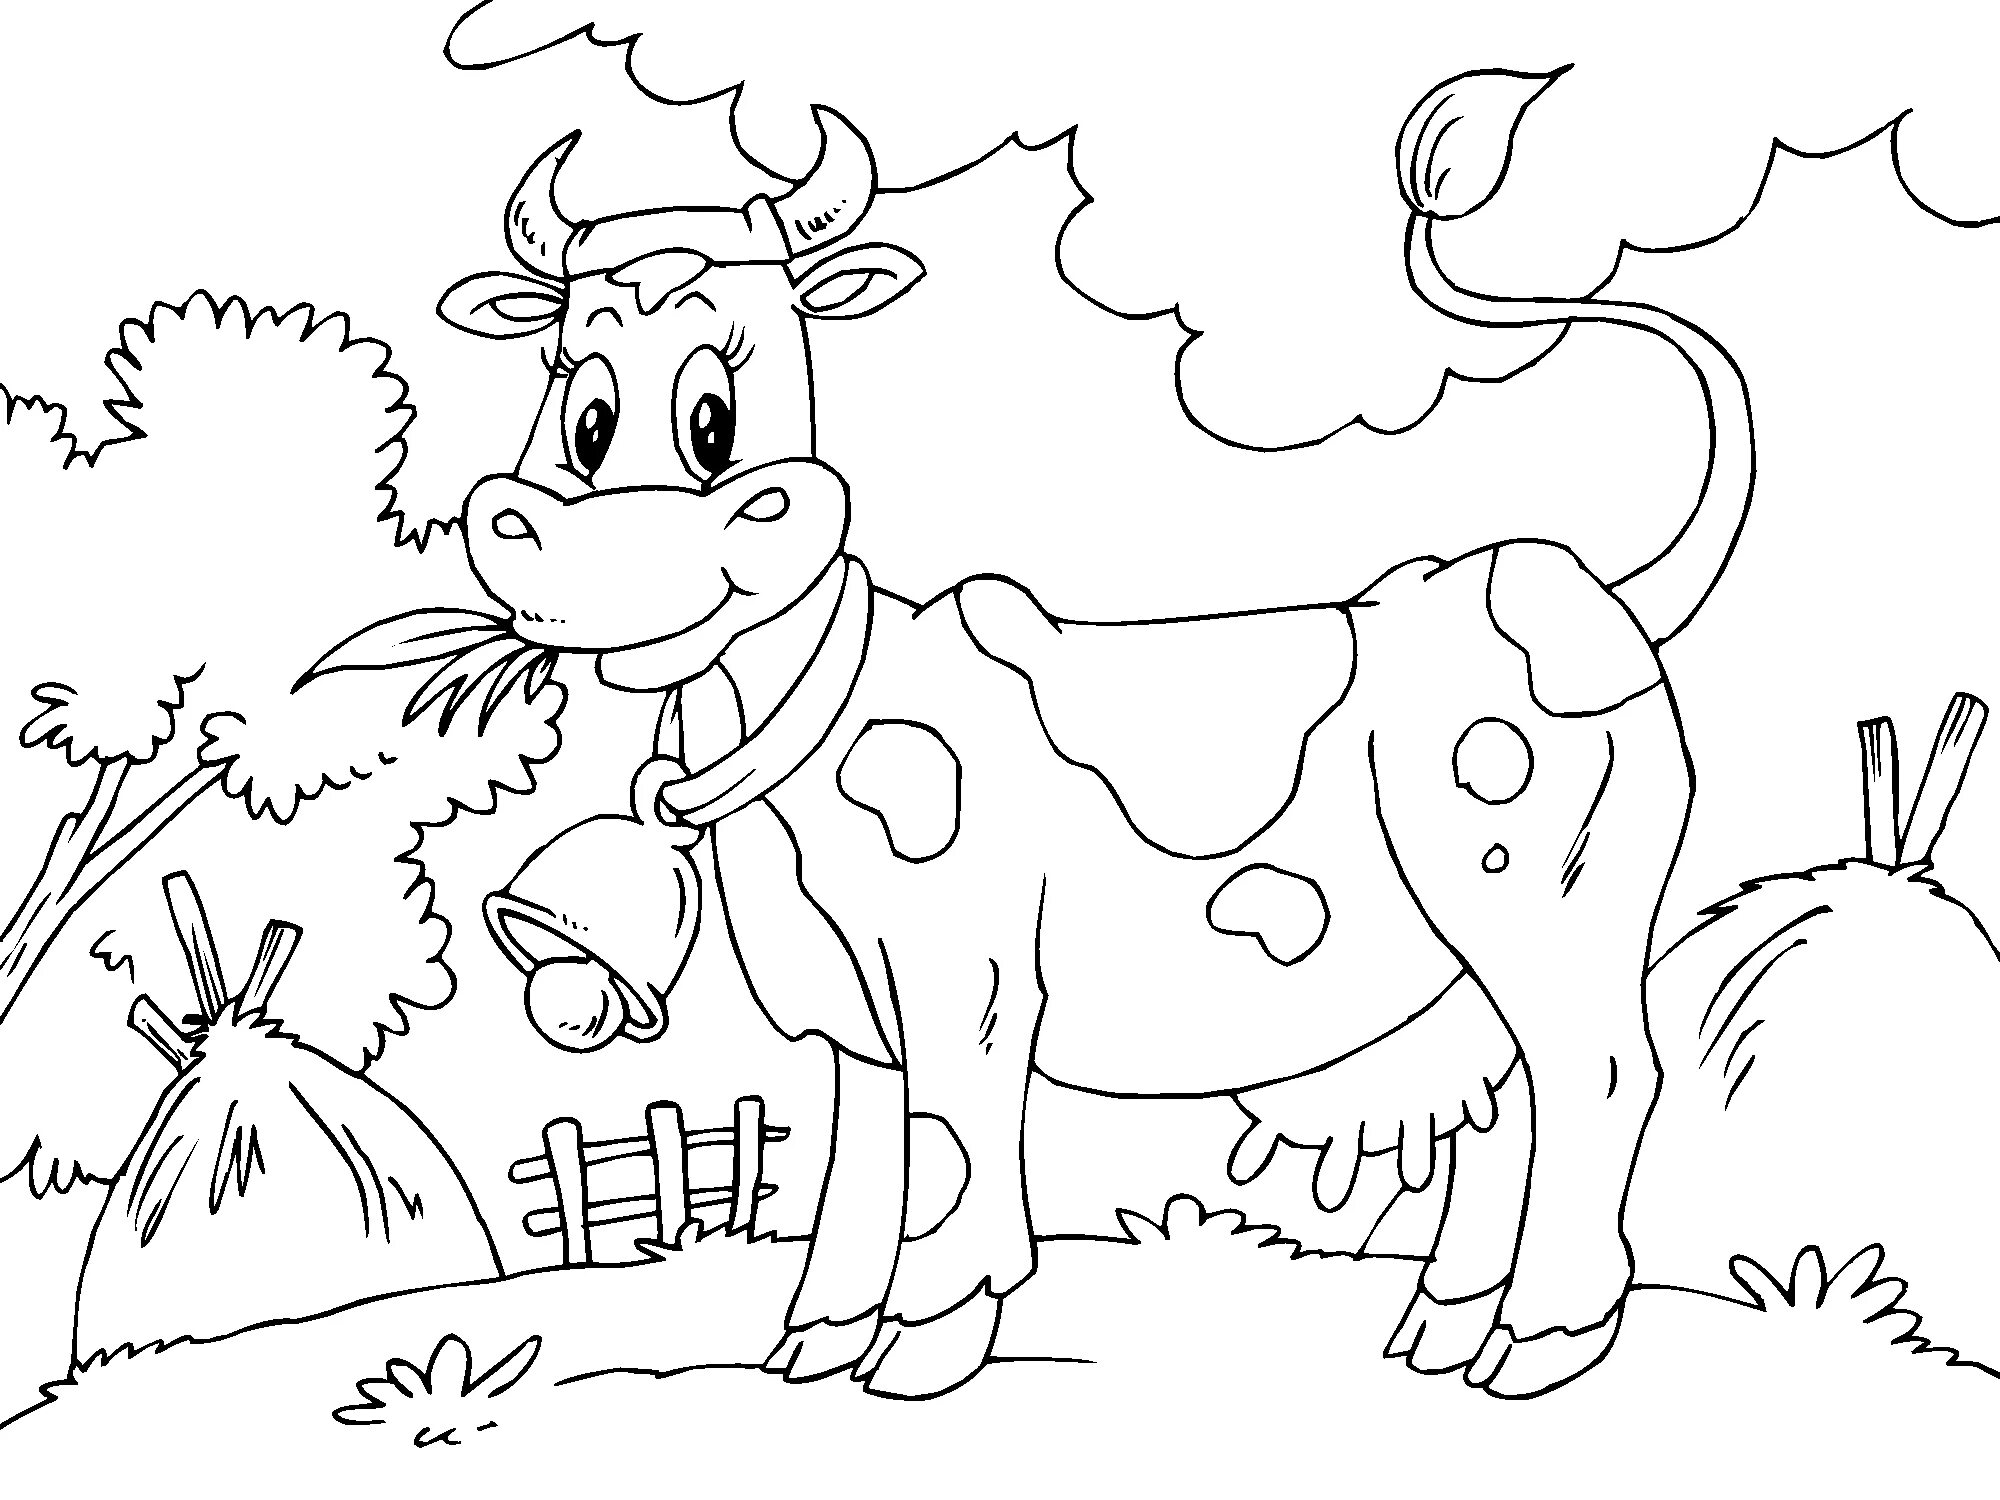 Live cow coloring book for 5-6 year olds